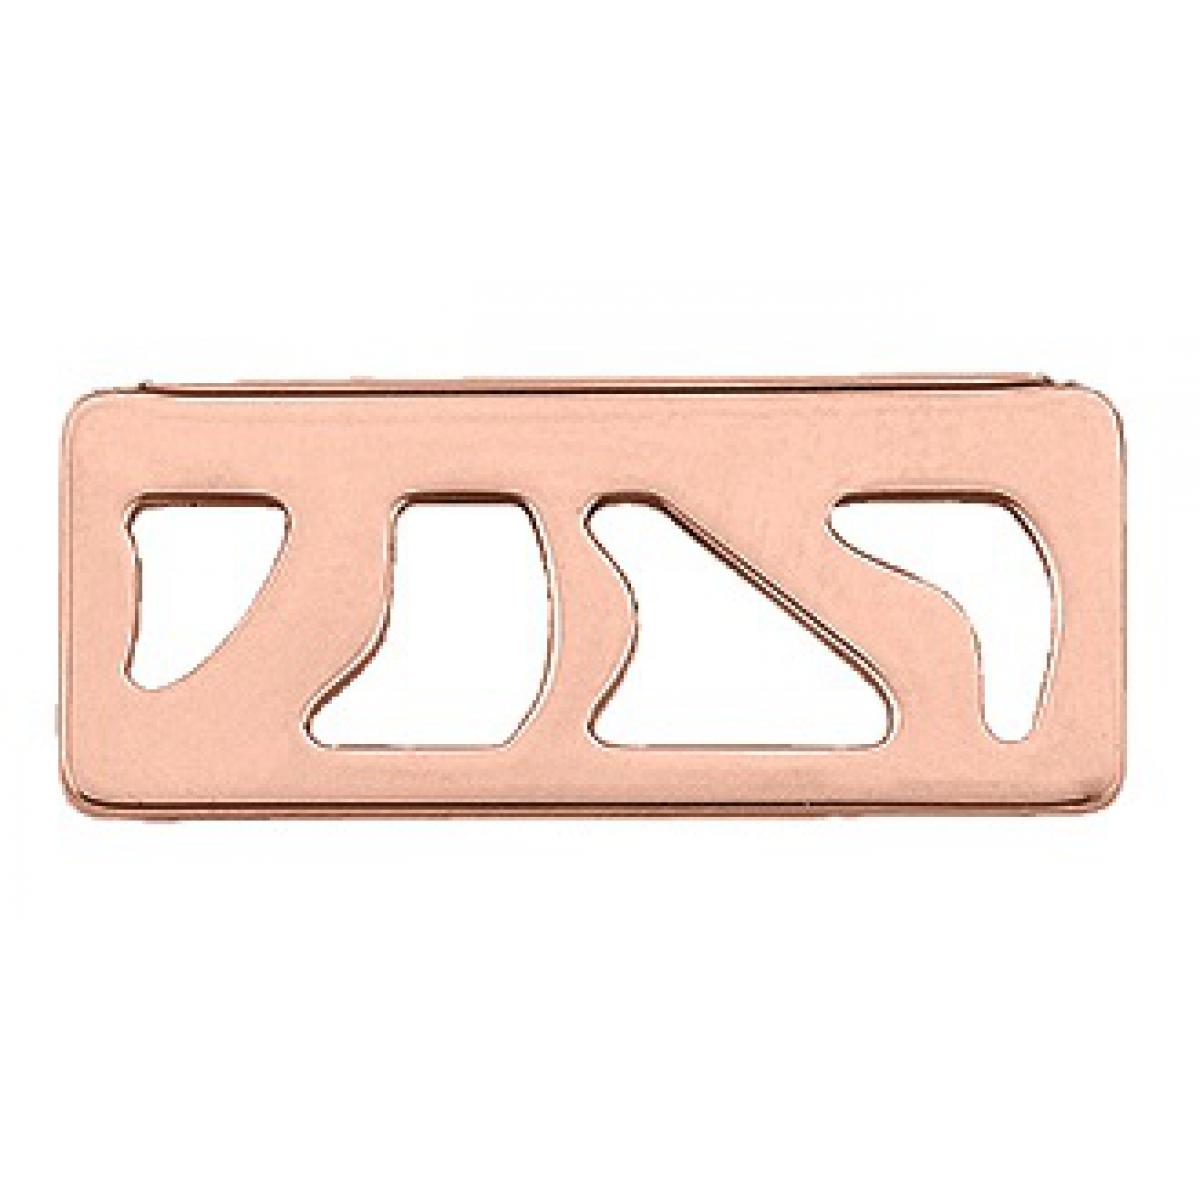 Pendentif  Perroquet Laiton Finition Or Rose Rectangle 25 mm